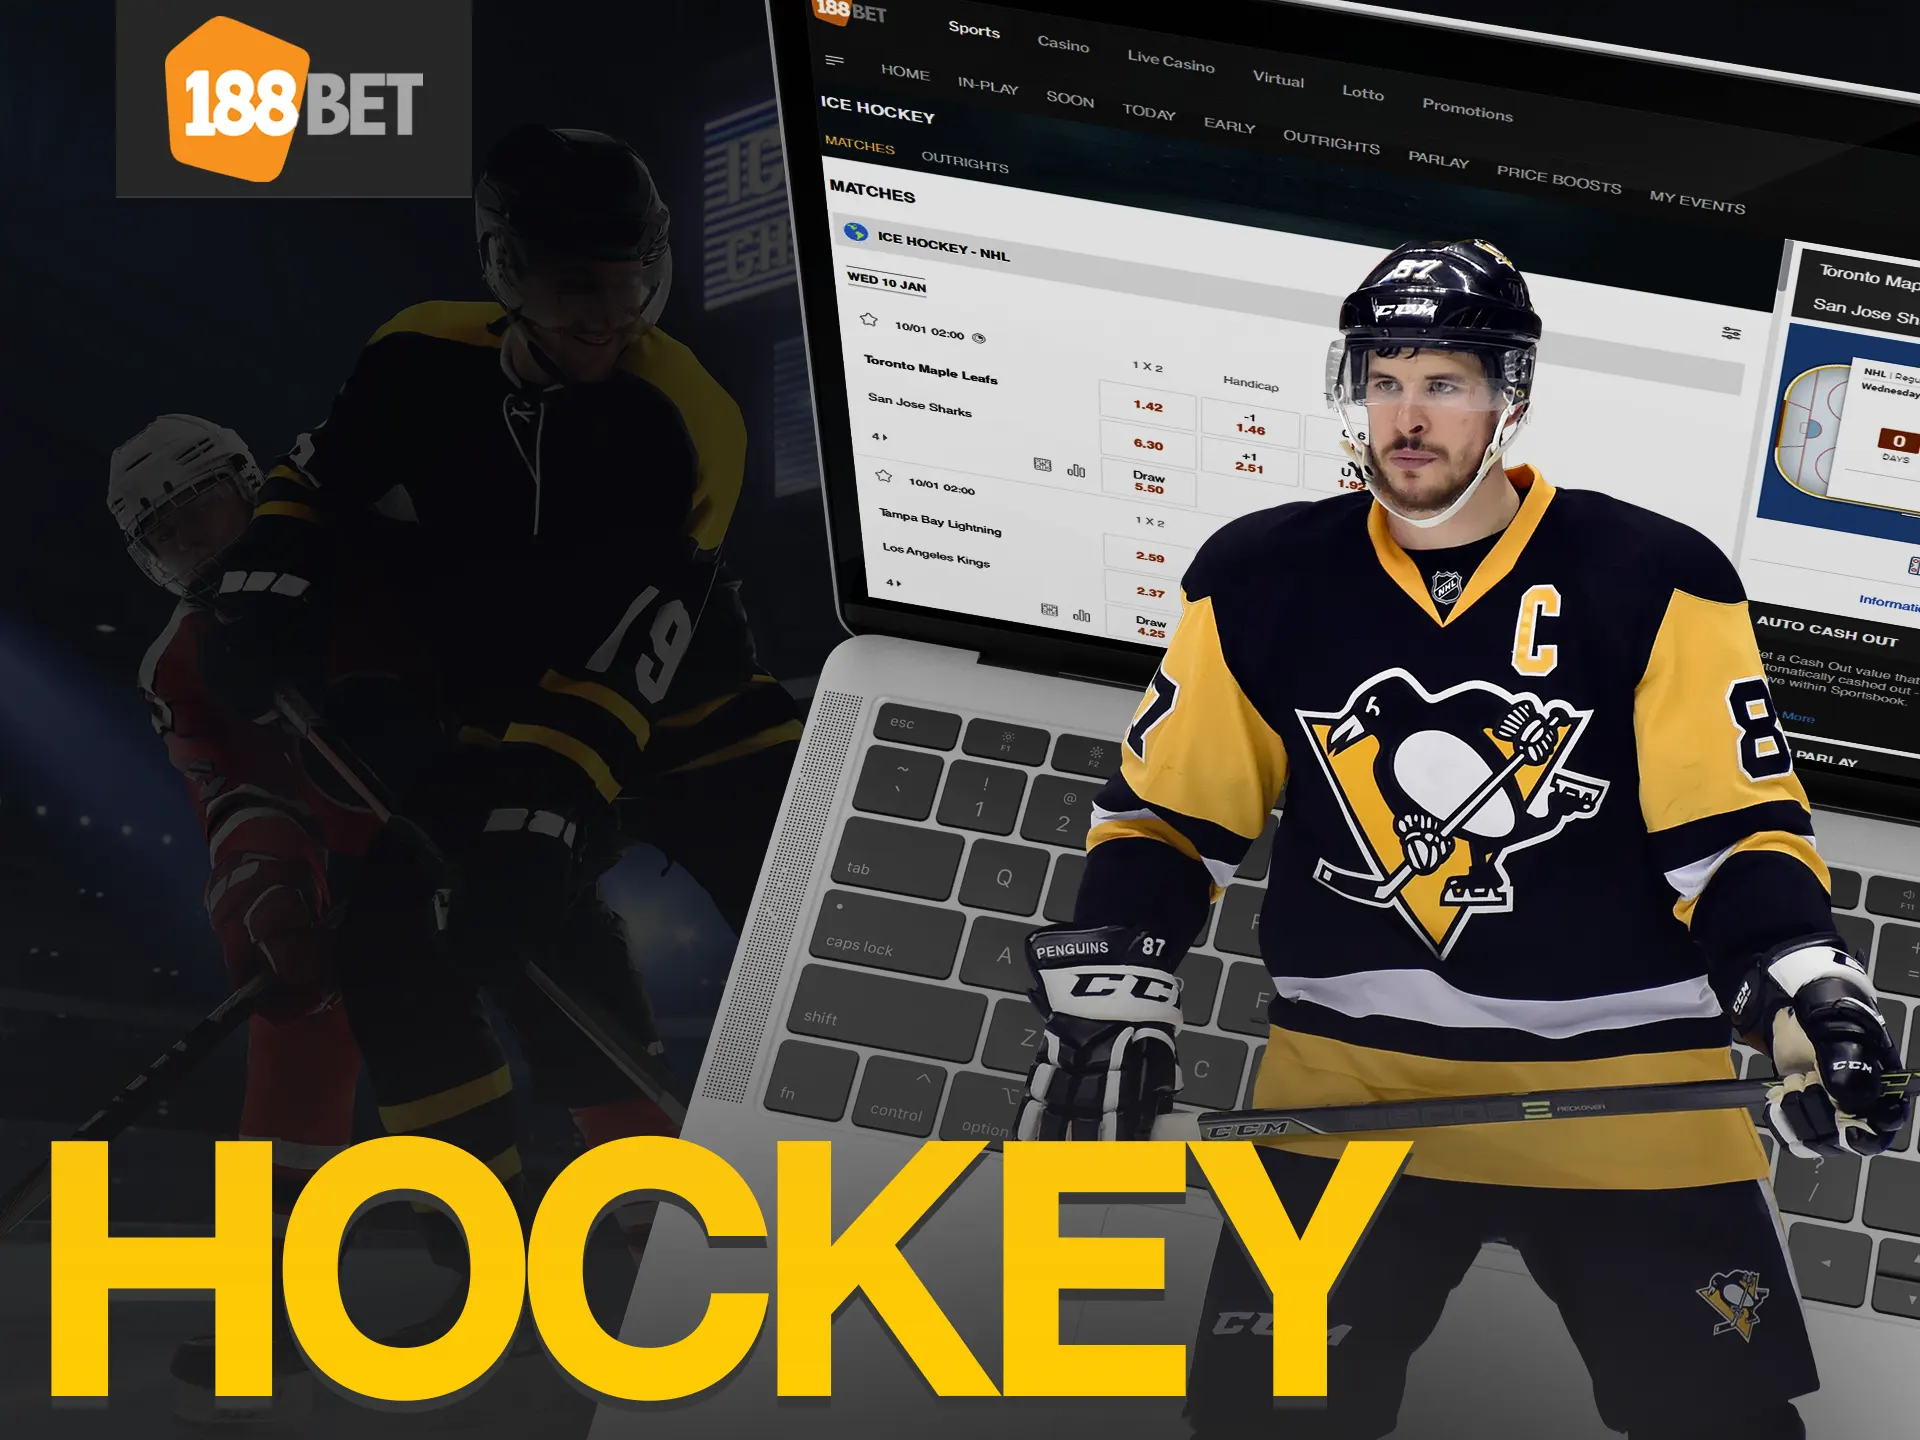 Bet on hockey matches with 188bet.